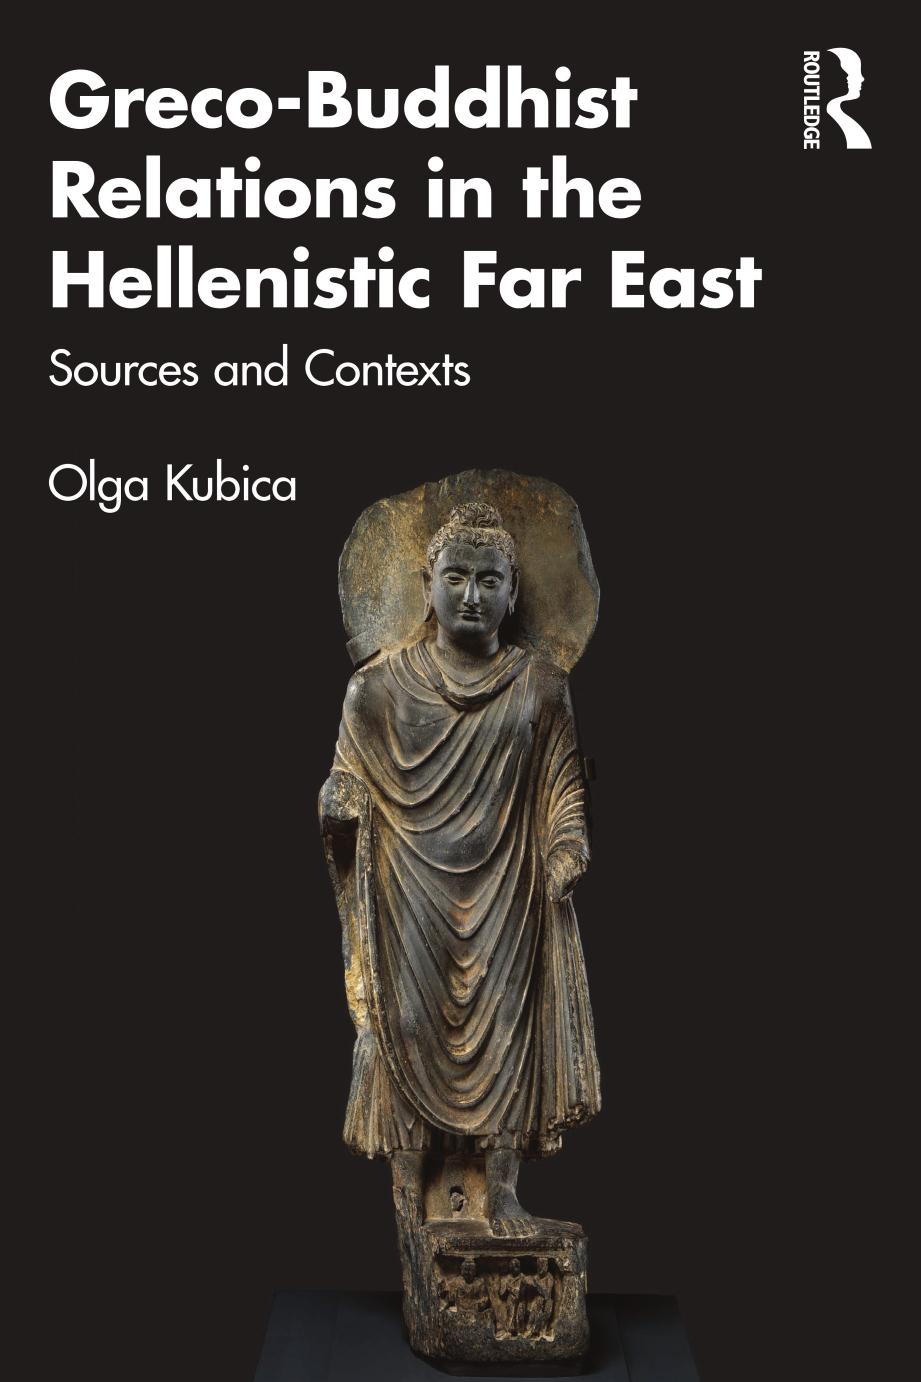 Greco-Buddhist Relations in the Hellenistic Far East: Sources and Contexts by Olga Kubica